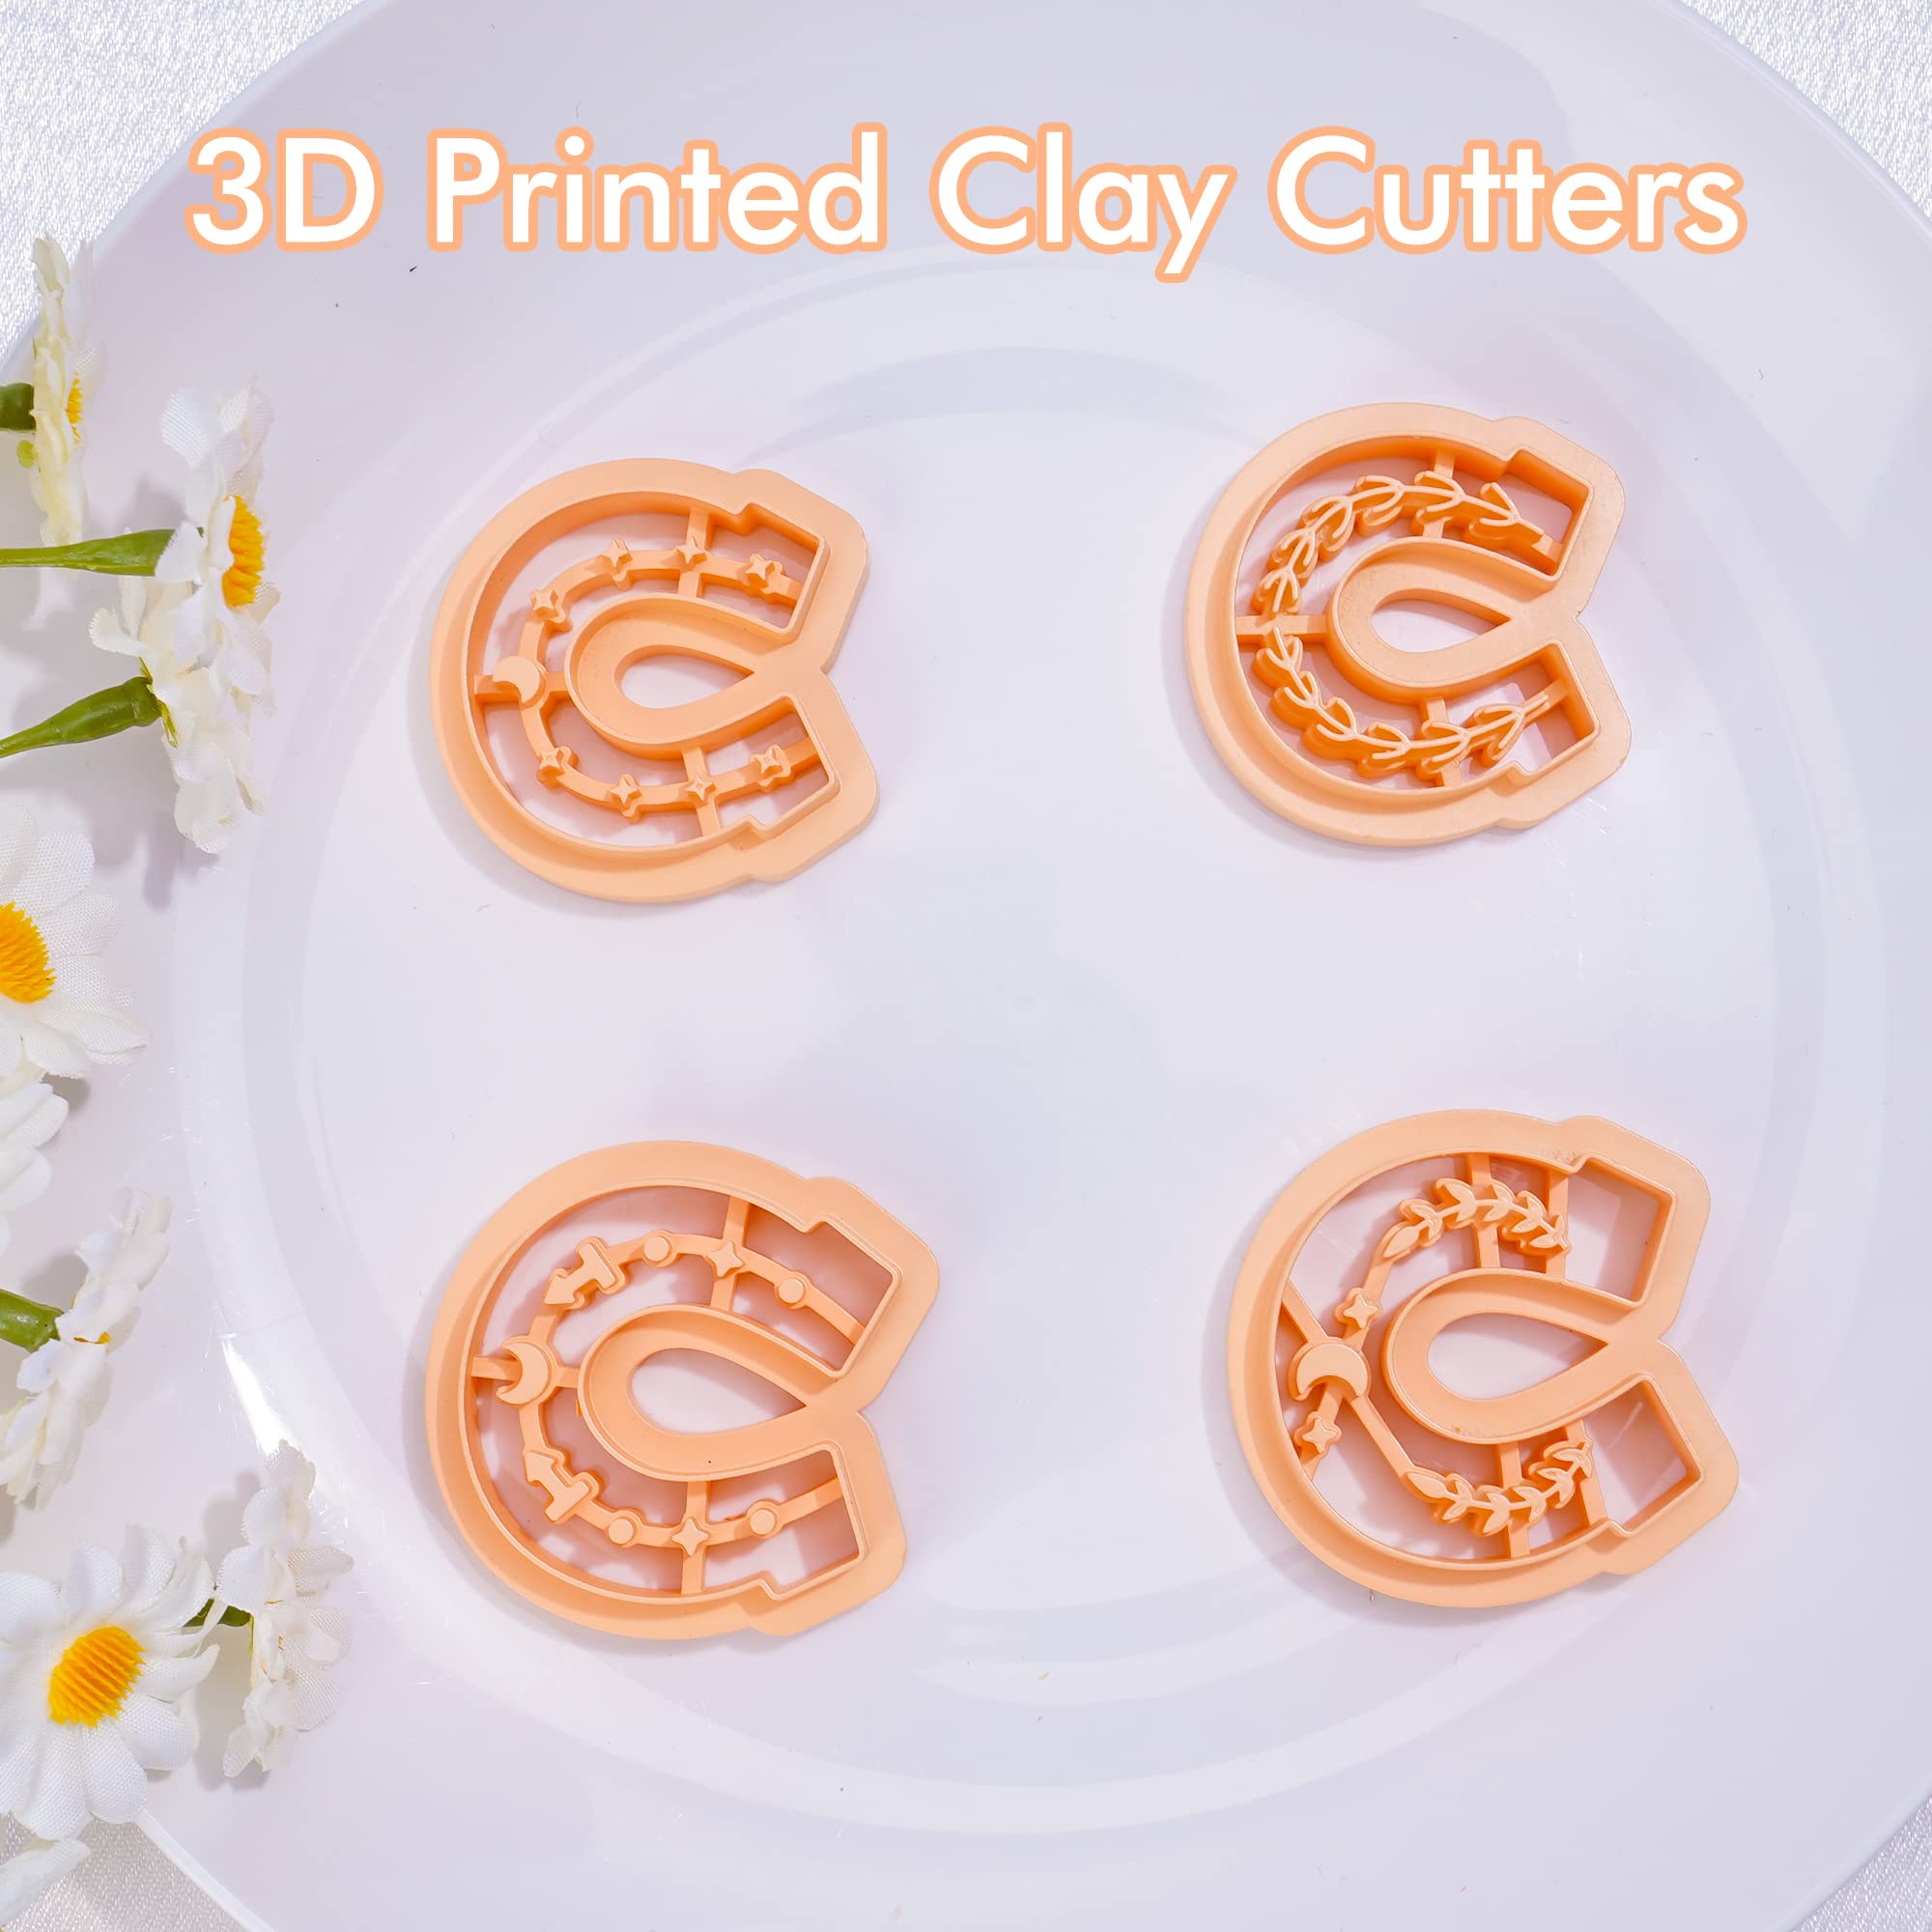 Puocaon Horseshoe Polymer Clay Cutters 4 Pcs